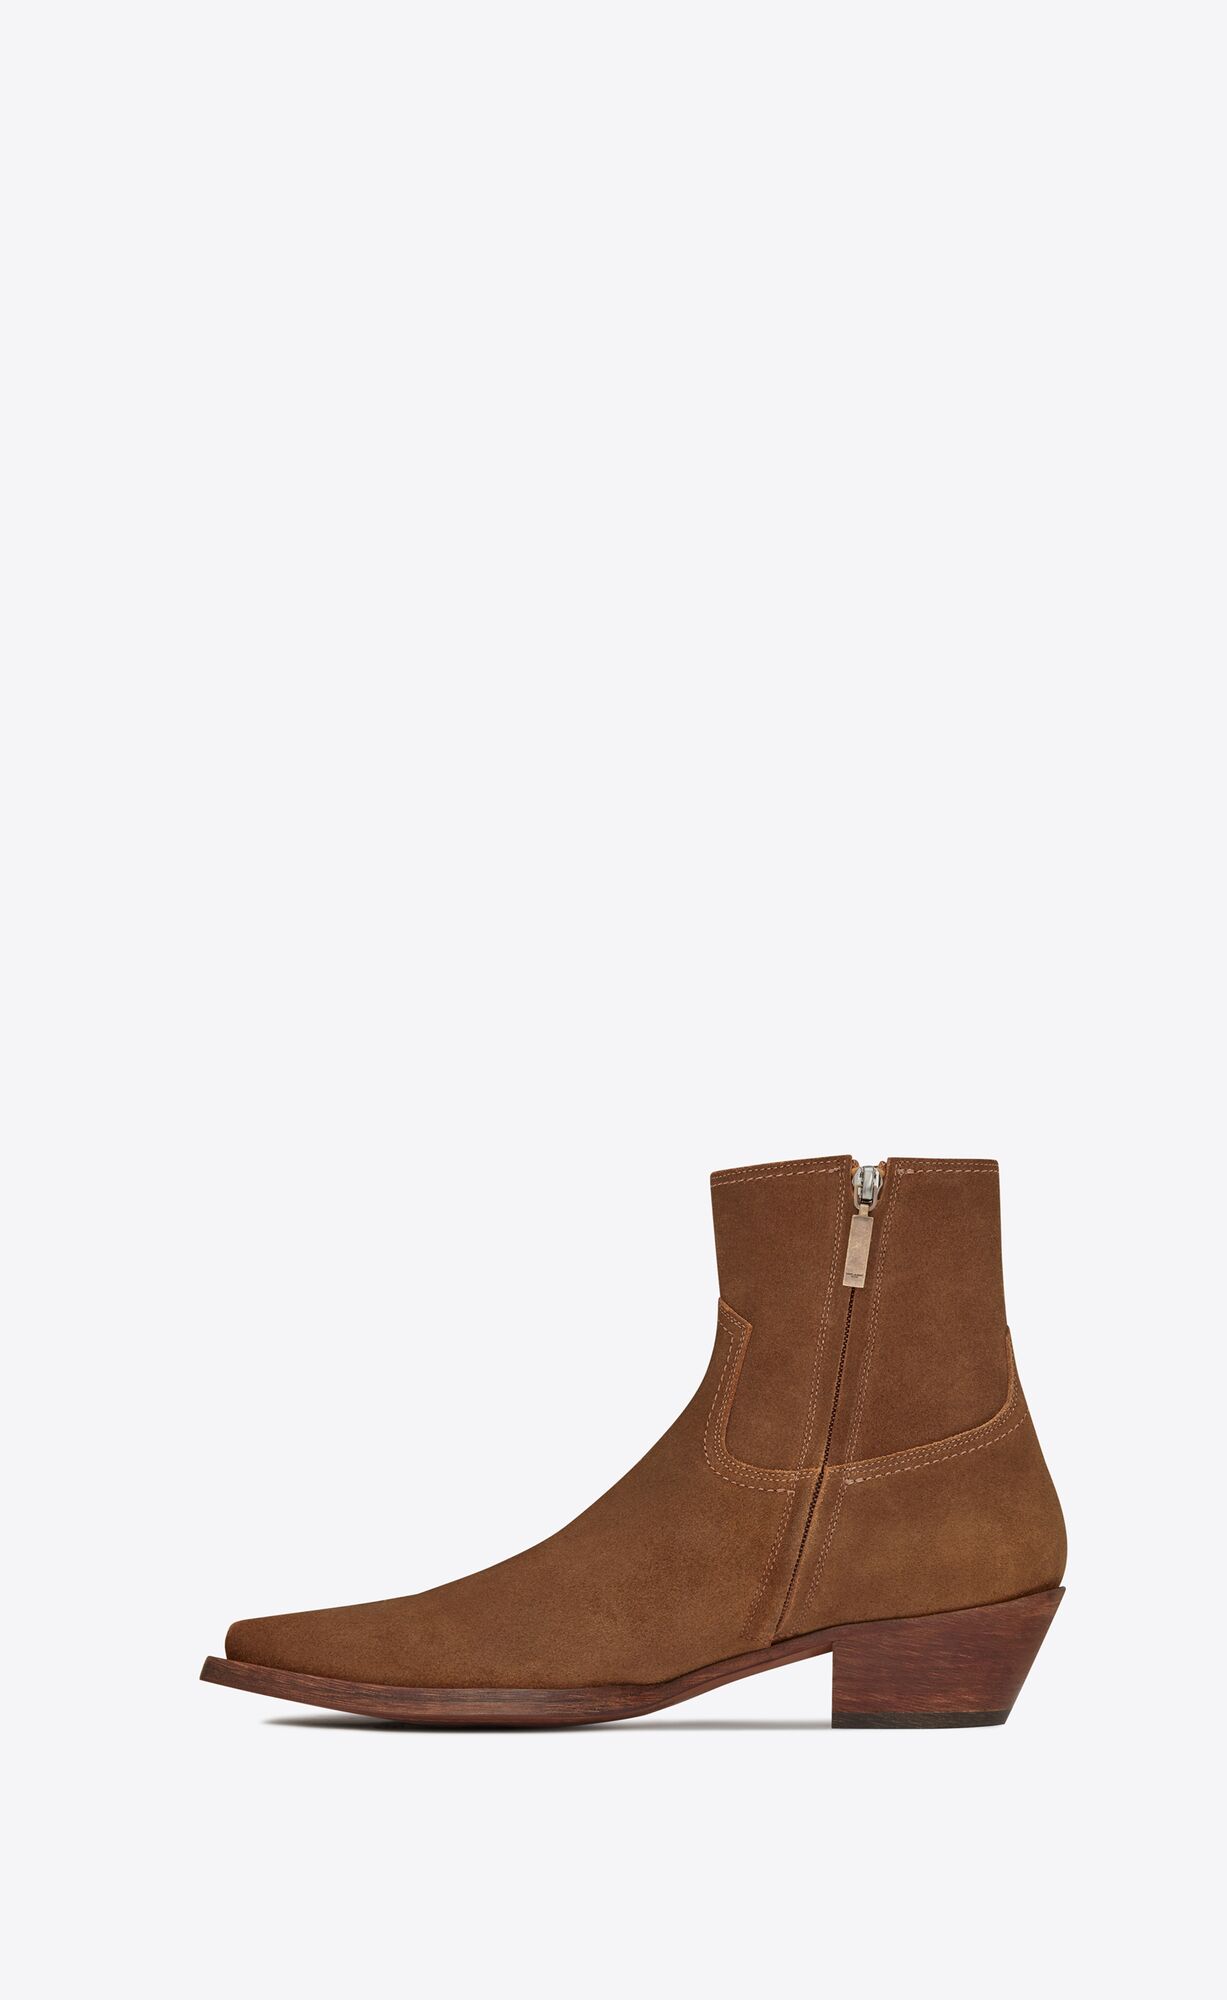 Lukas boots in suede | Saint Laurent United States | YSL.com